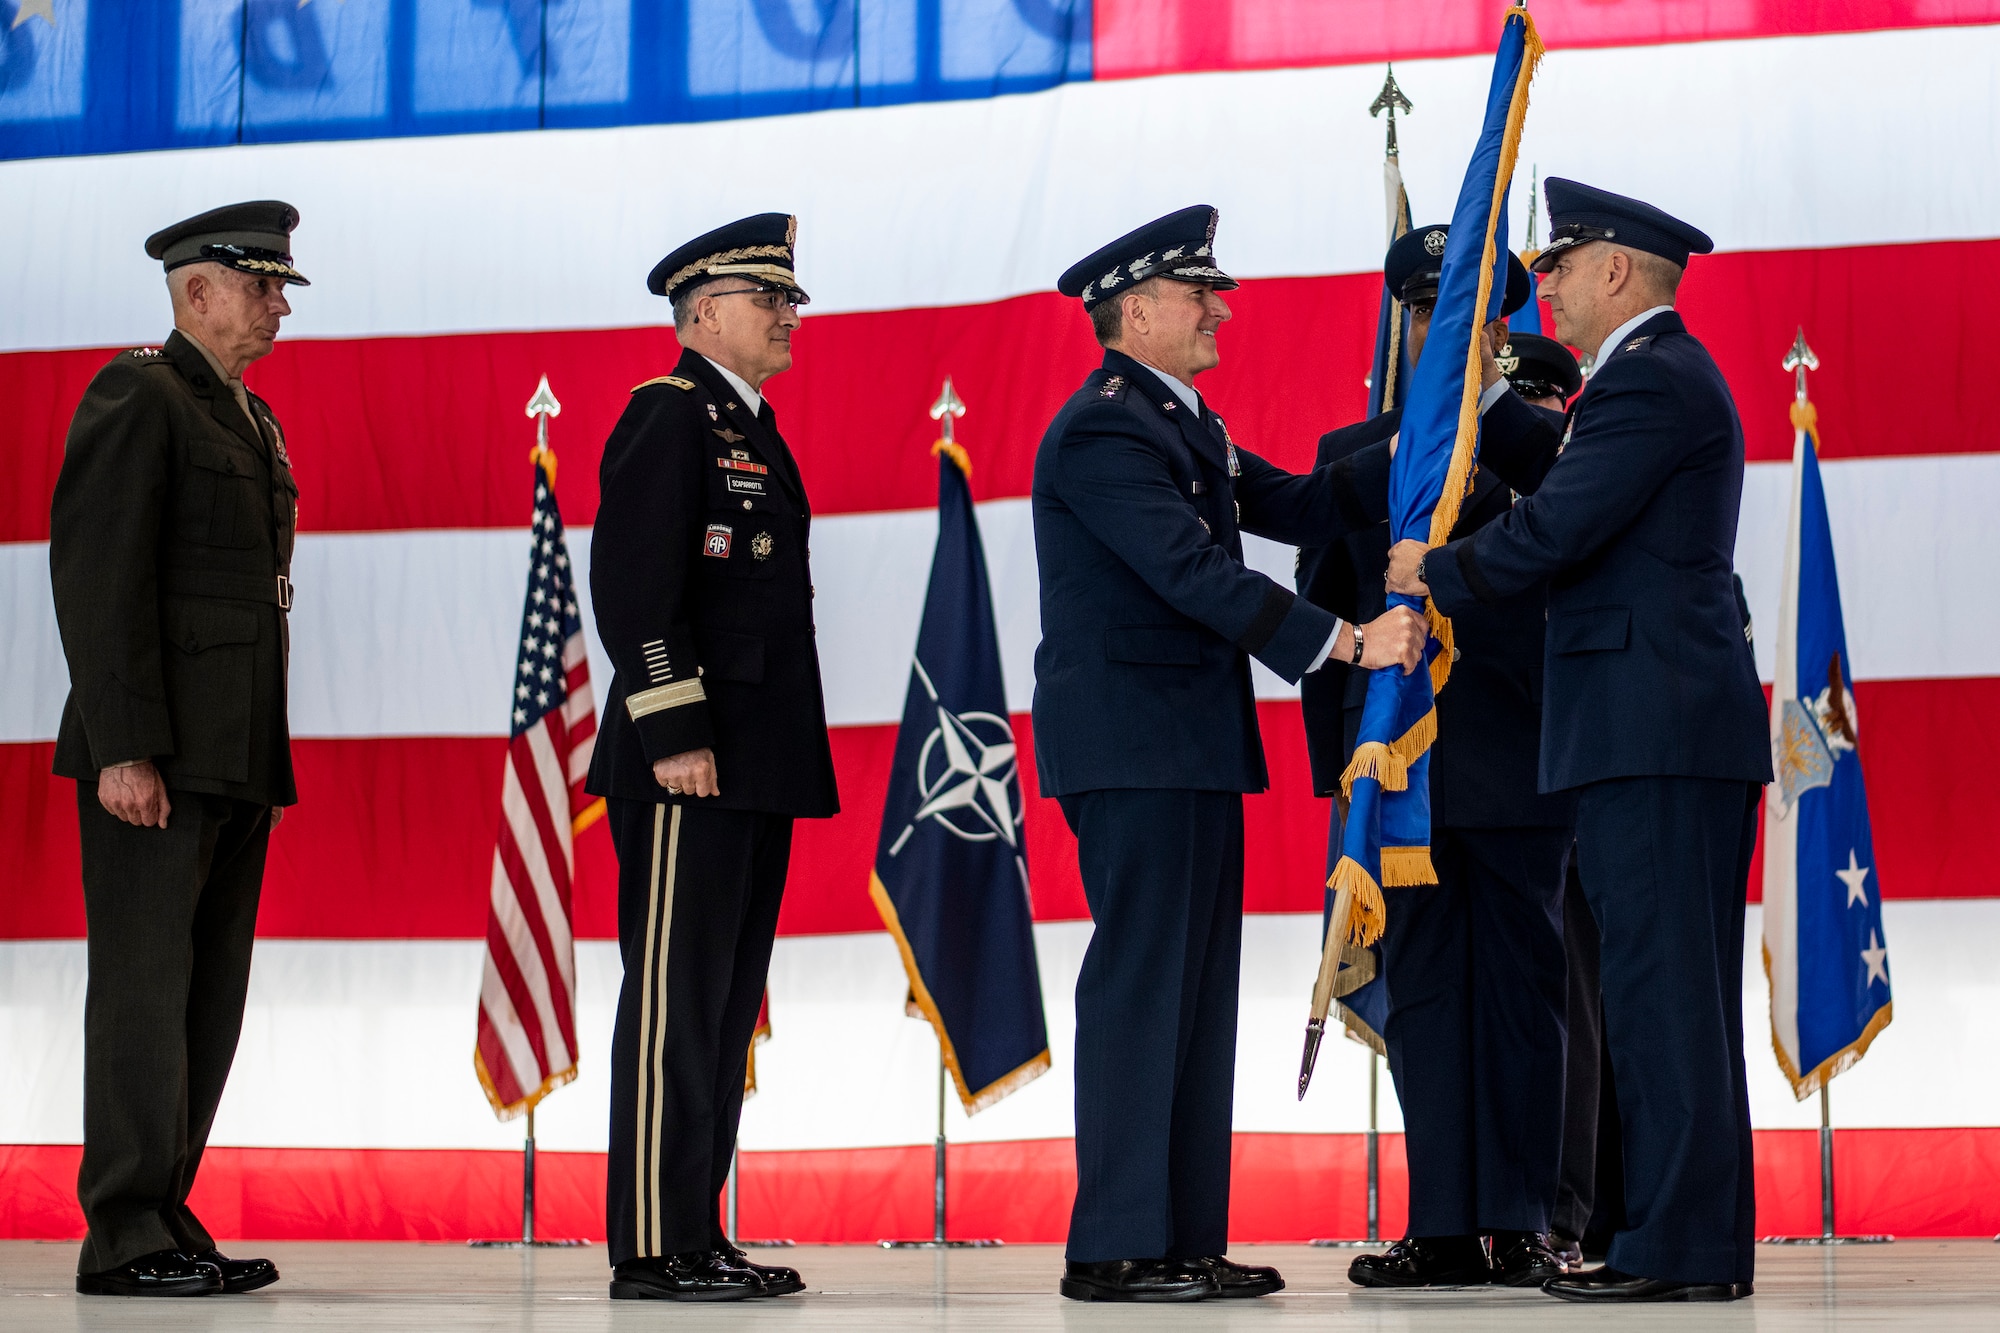 Gen. Harrigian takes command of USAFE-AFAFRICA during change of command ceremony.